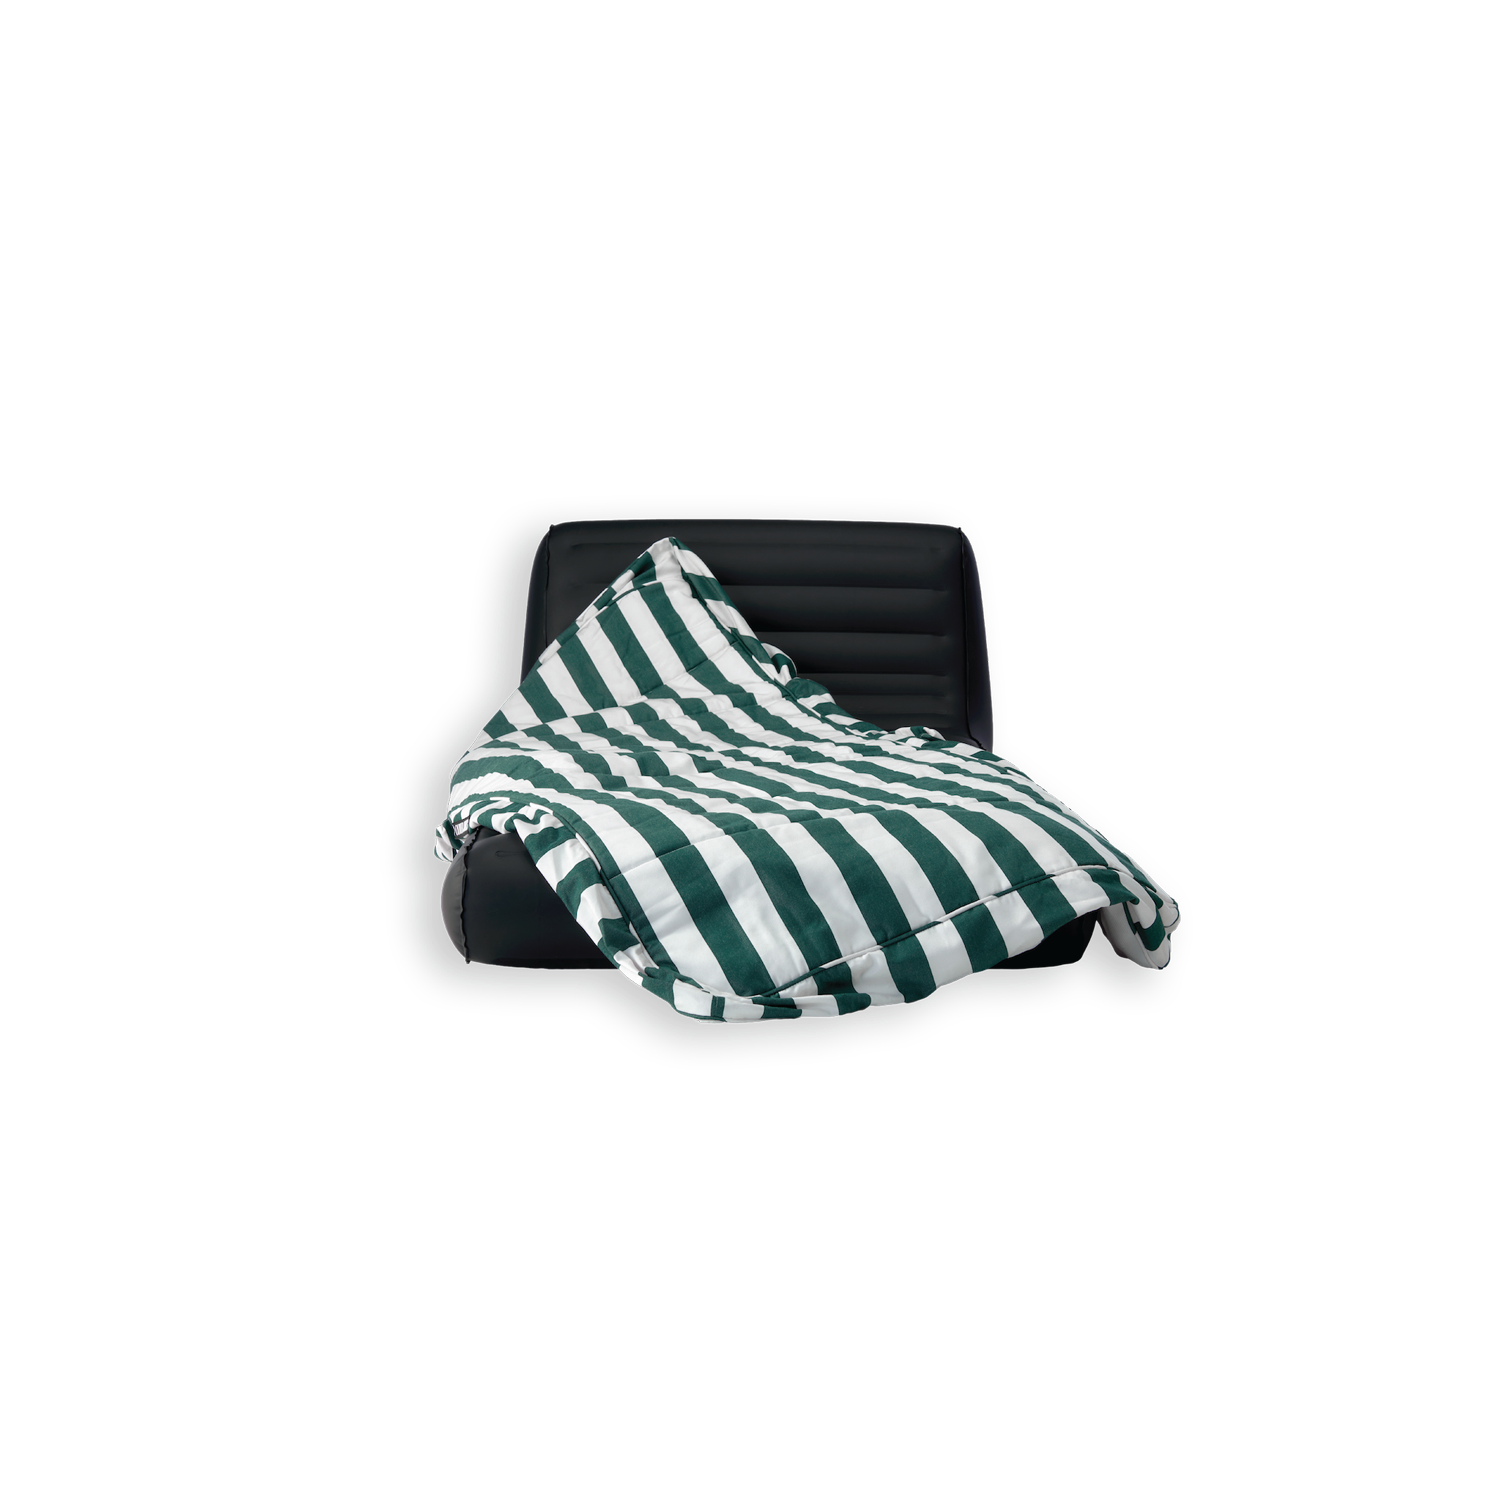 A green and white striped luxury pool float cover draped over a TPU inflatable core.